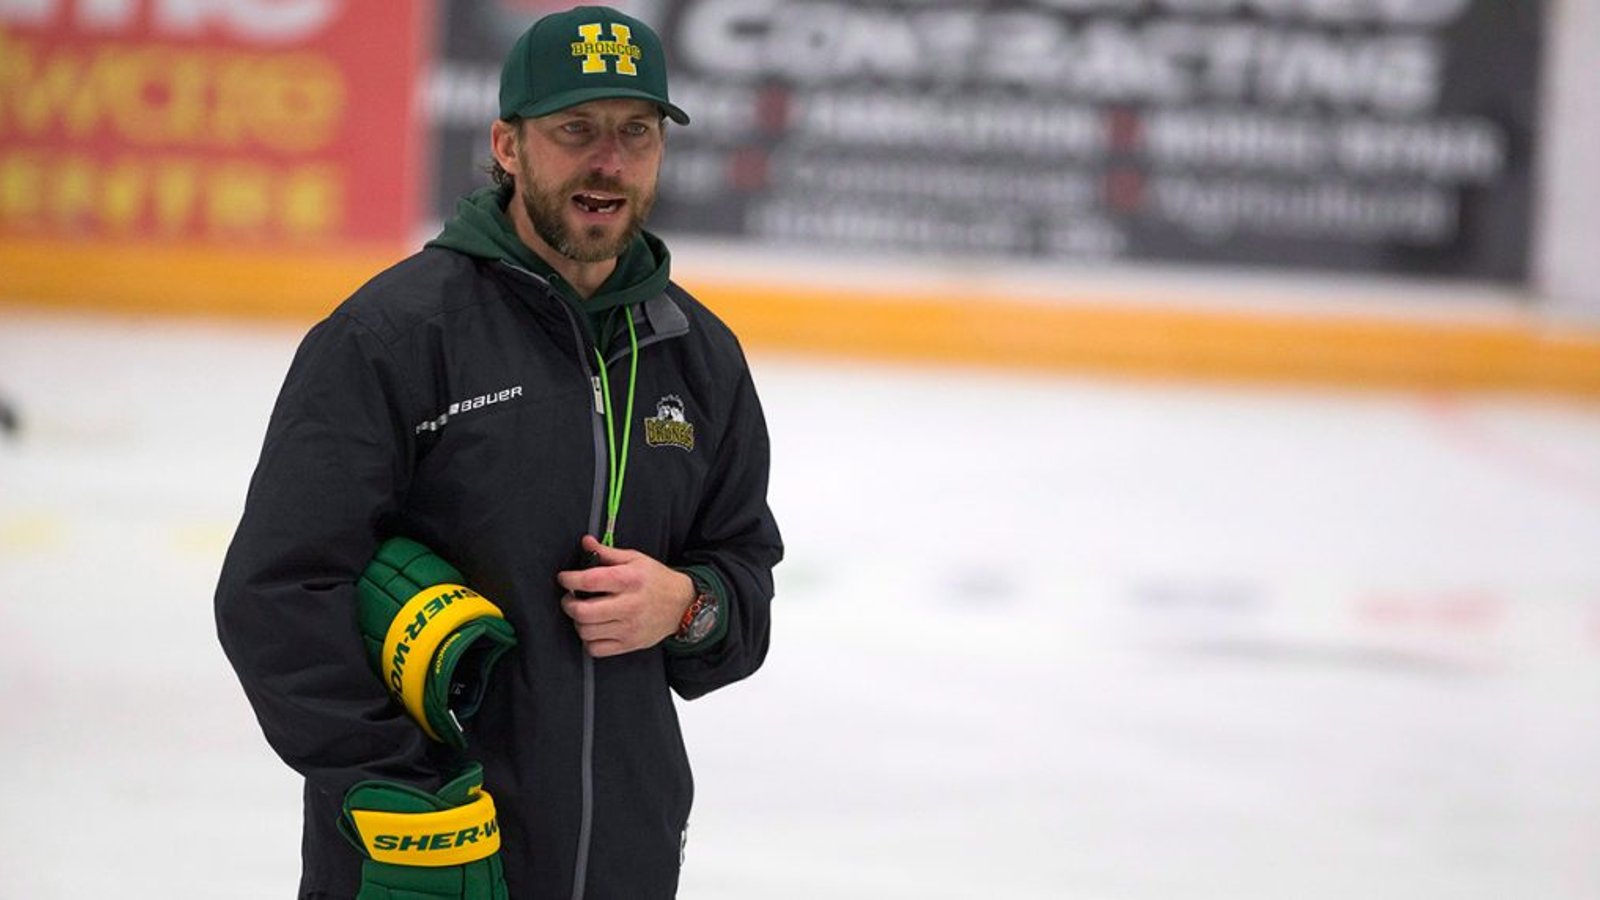 JUST IN: Oystrick steps down as head coach of the Humboldt Broncos 